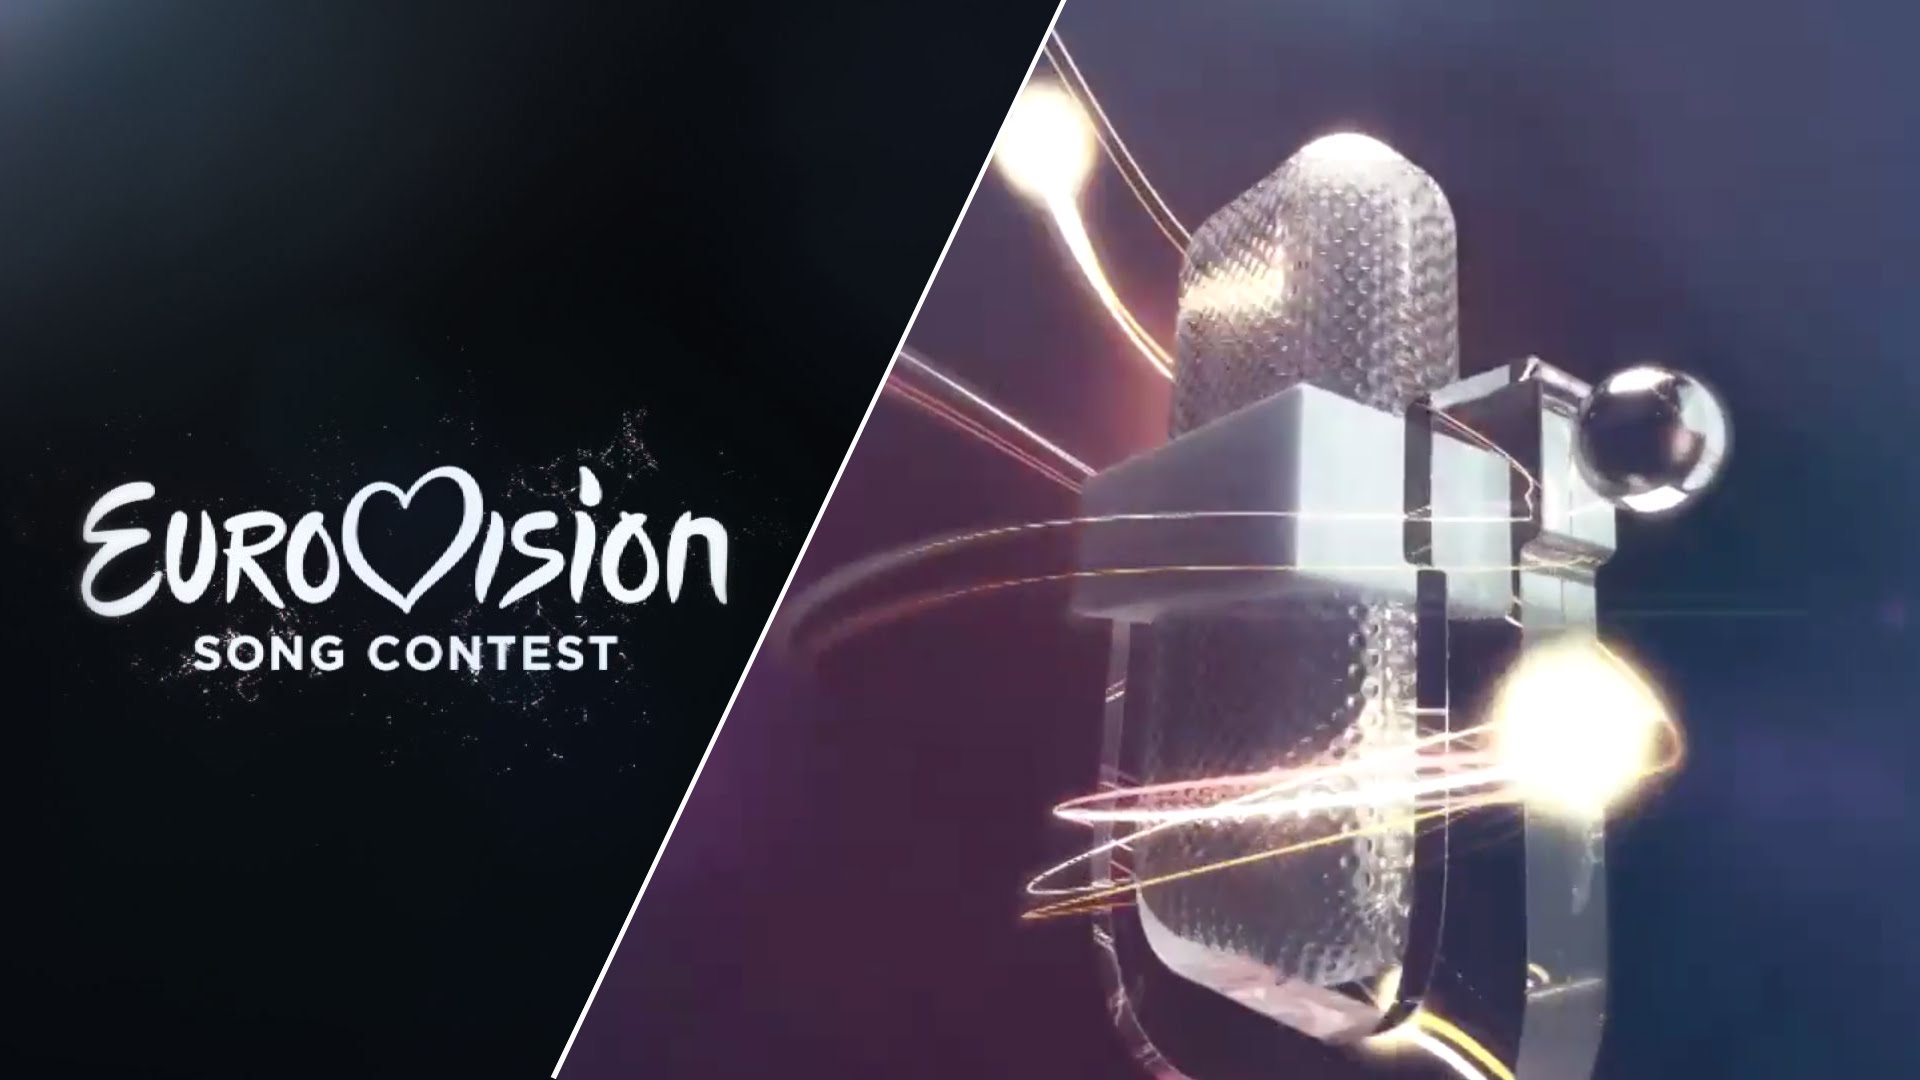 Eurovision 2015 selected songs up to week 10